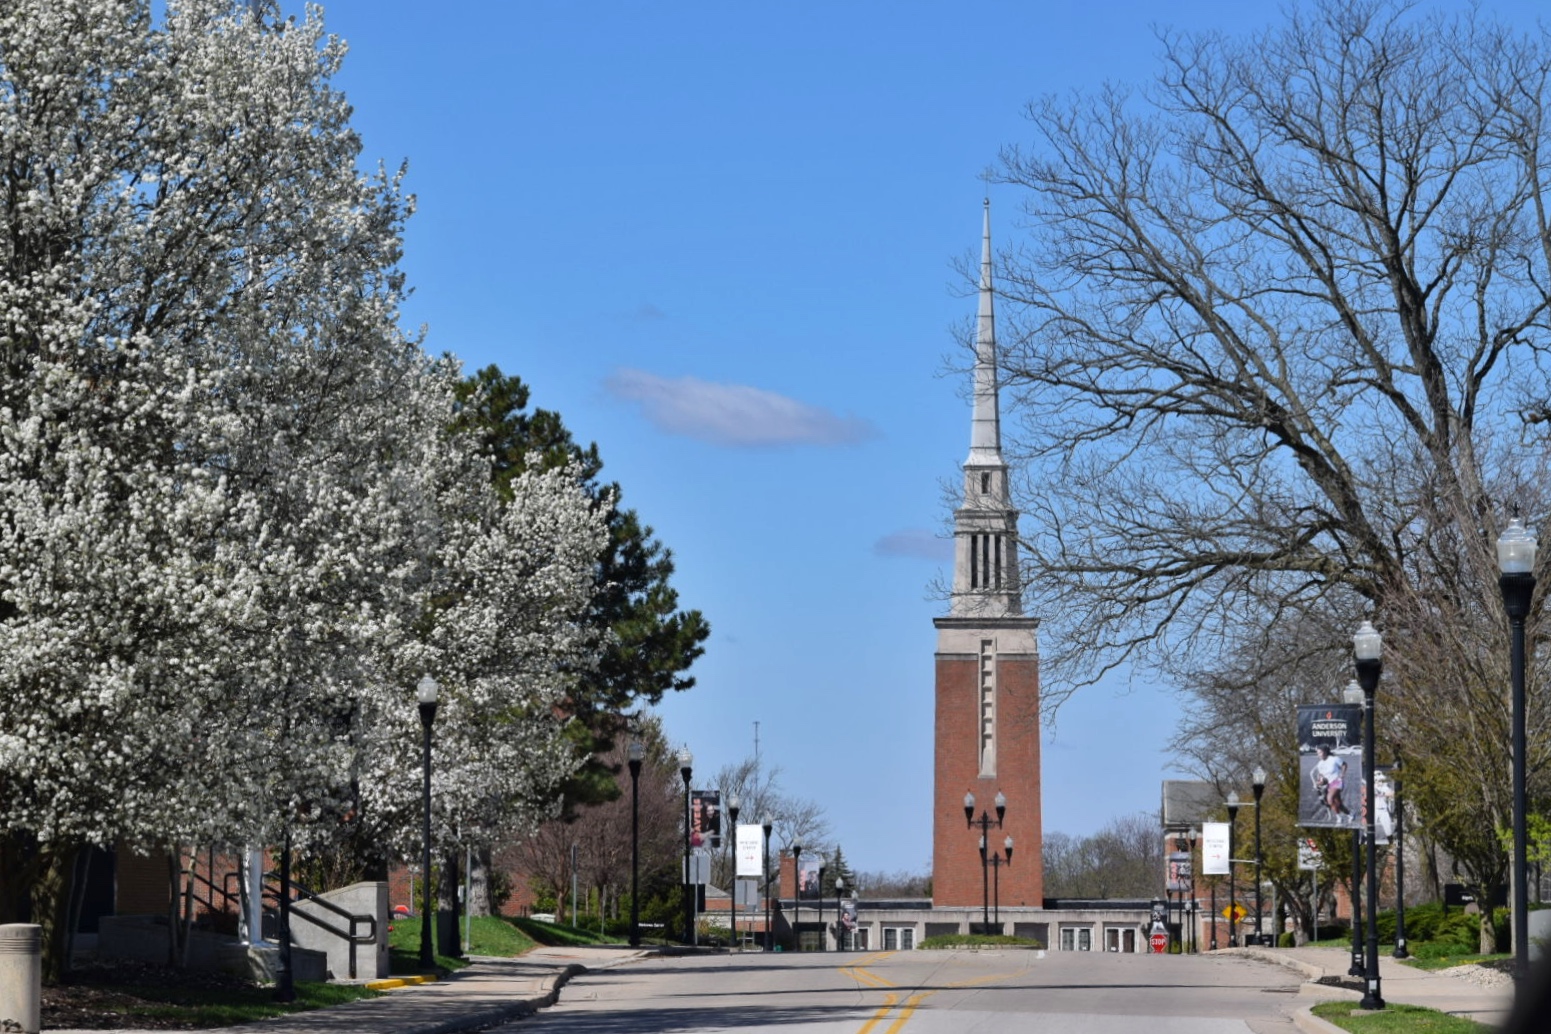 A red brick tower with a white spire sits at the end of a tree-lined street.